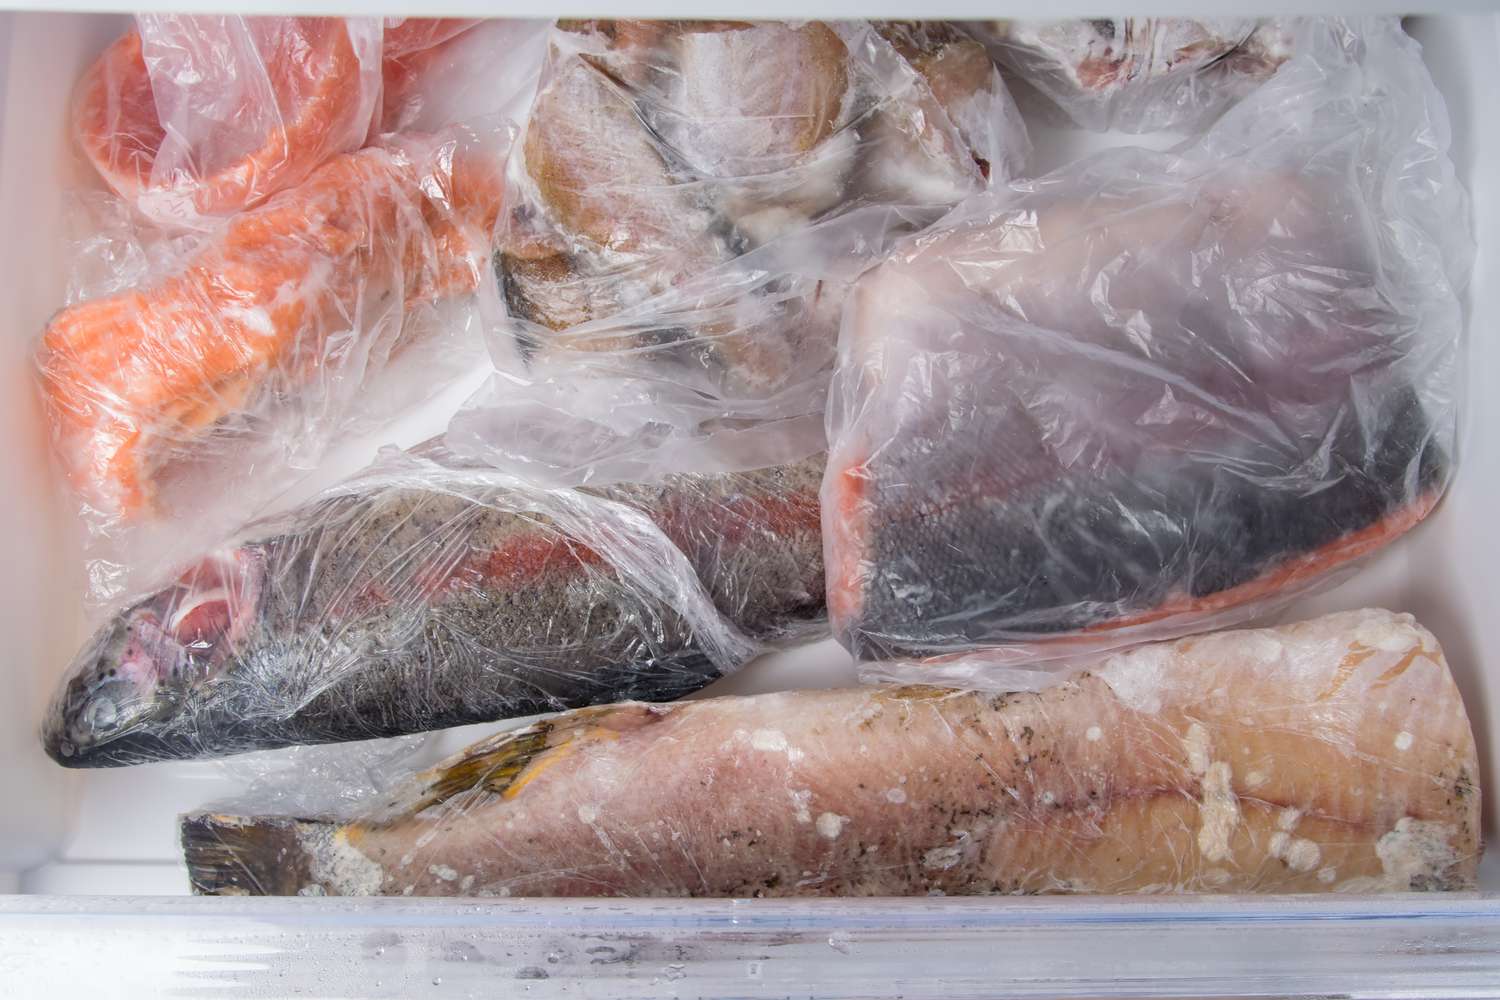 How Long Does Fish Last In The Freezer Vacuum-Sealed